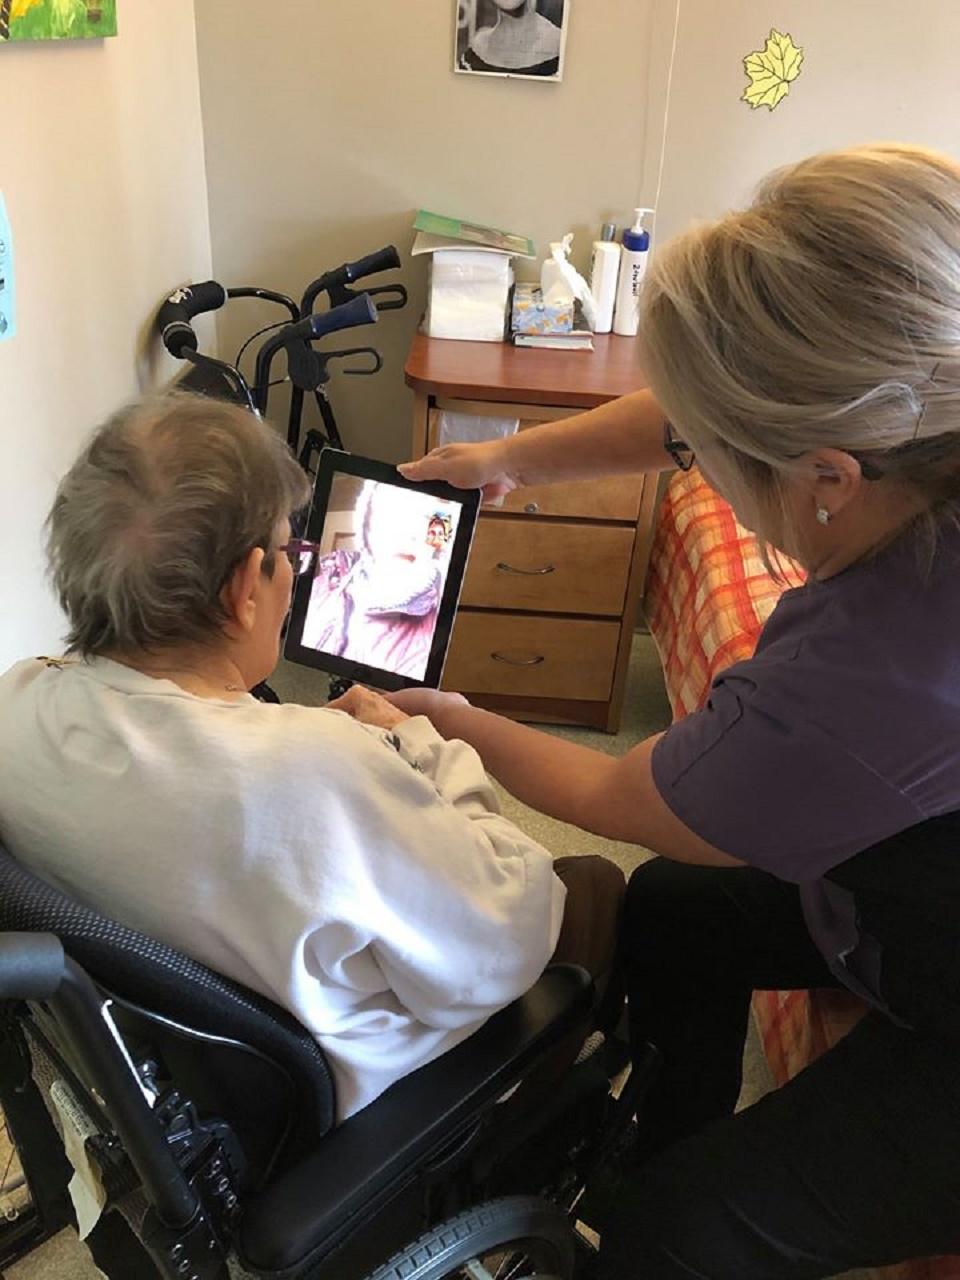 Long-term care facilities adapt communication and recreation for residents during COVID-19 emergency